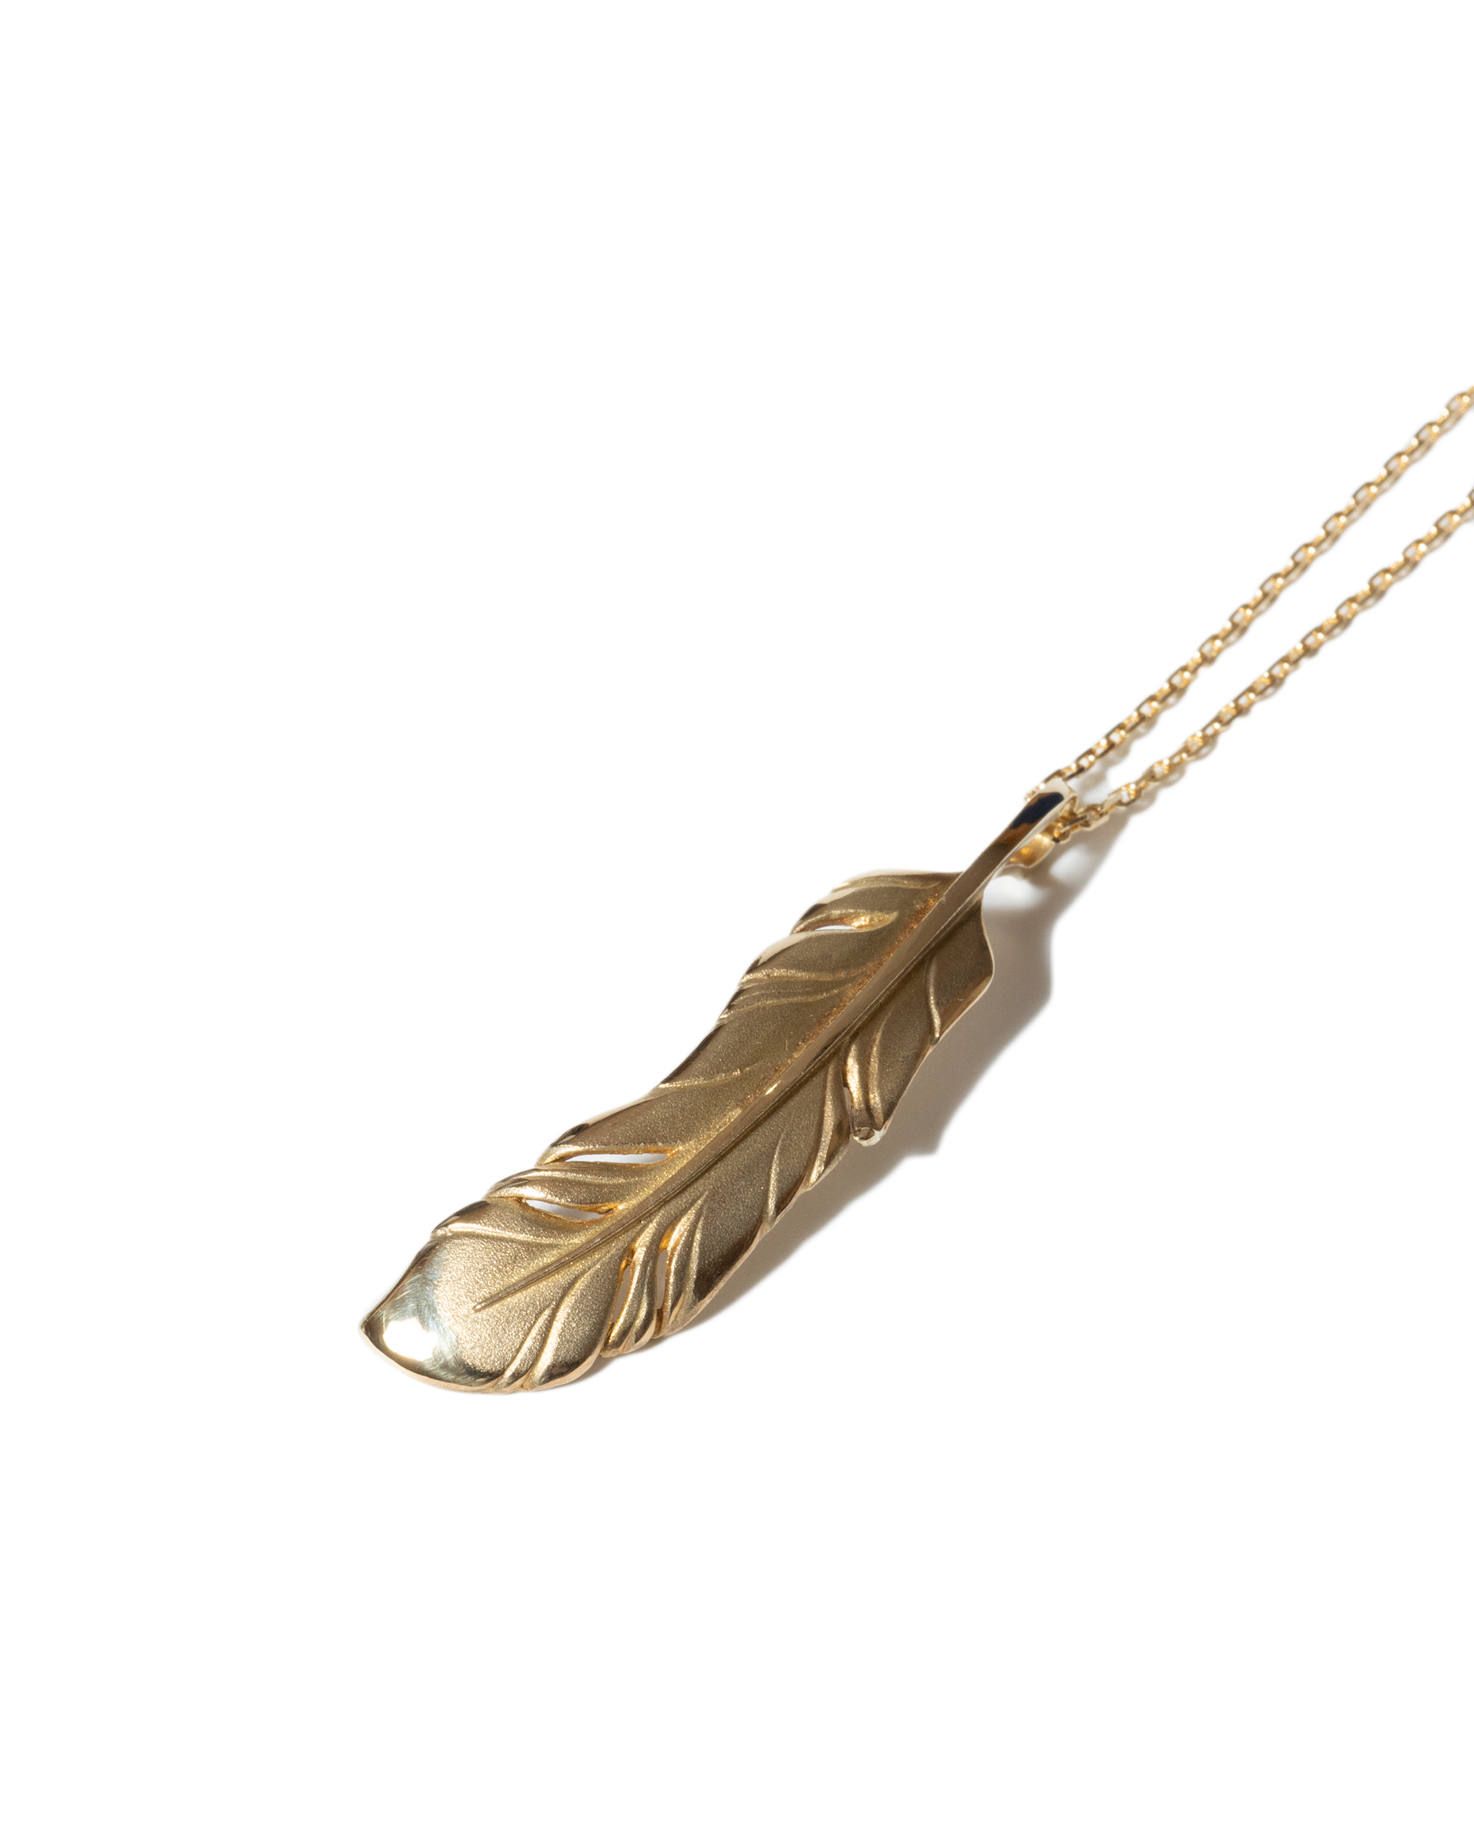 Sympathy of Soul - Old Feather Pendant Large - K18 Yellow Gold